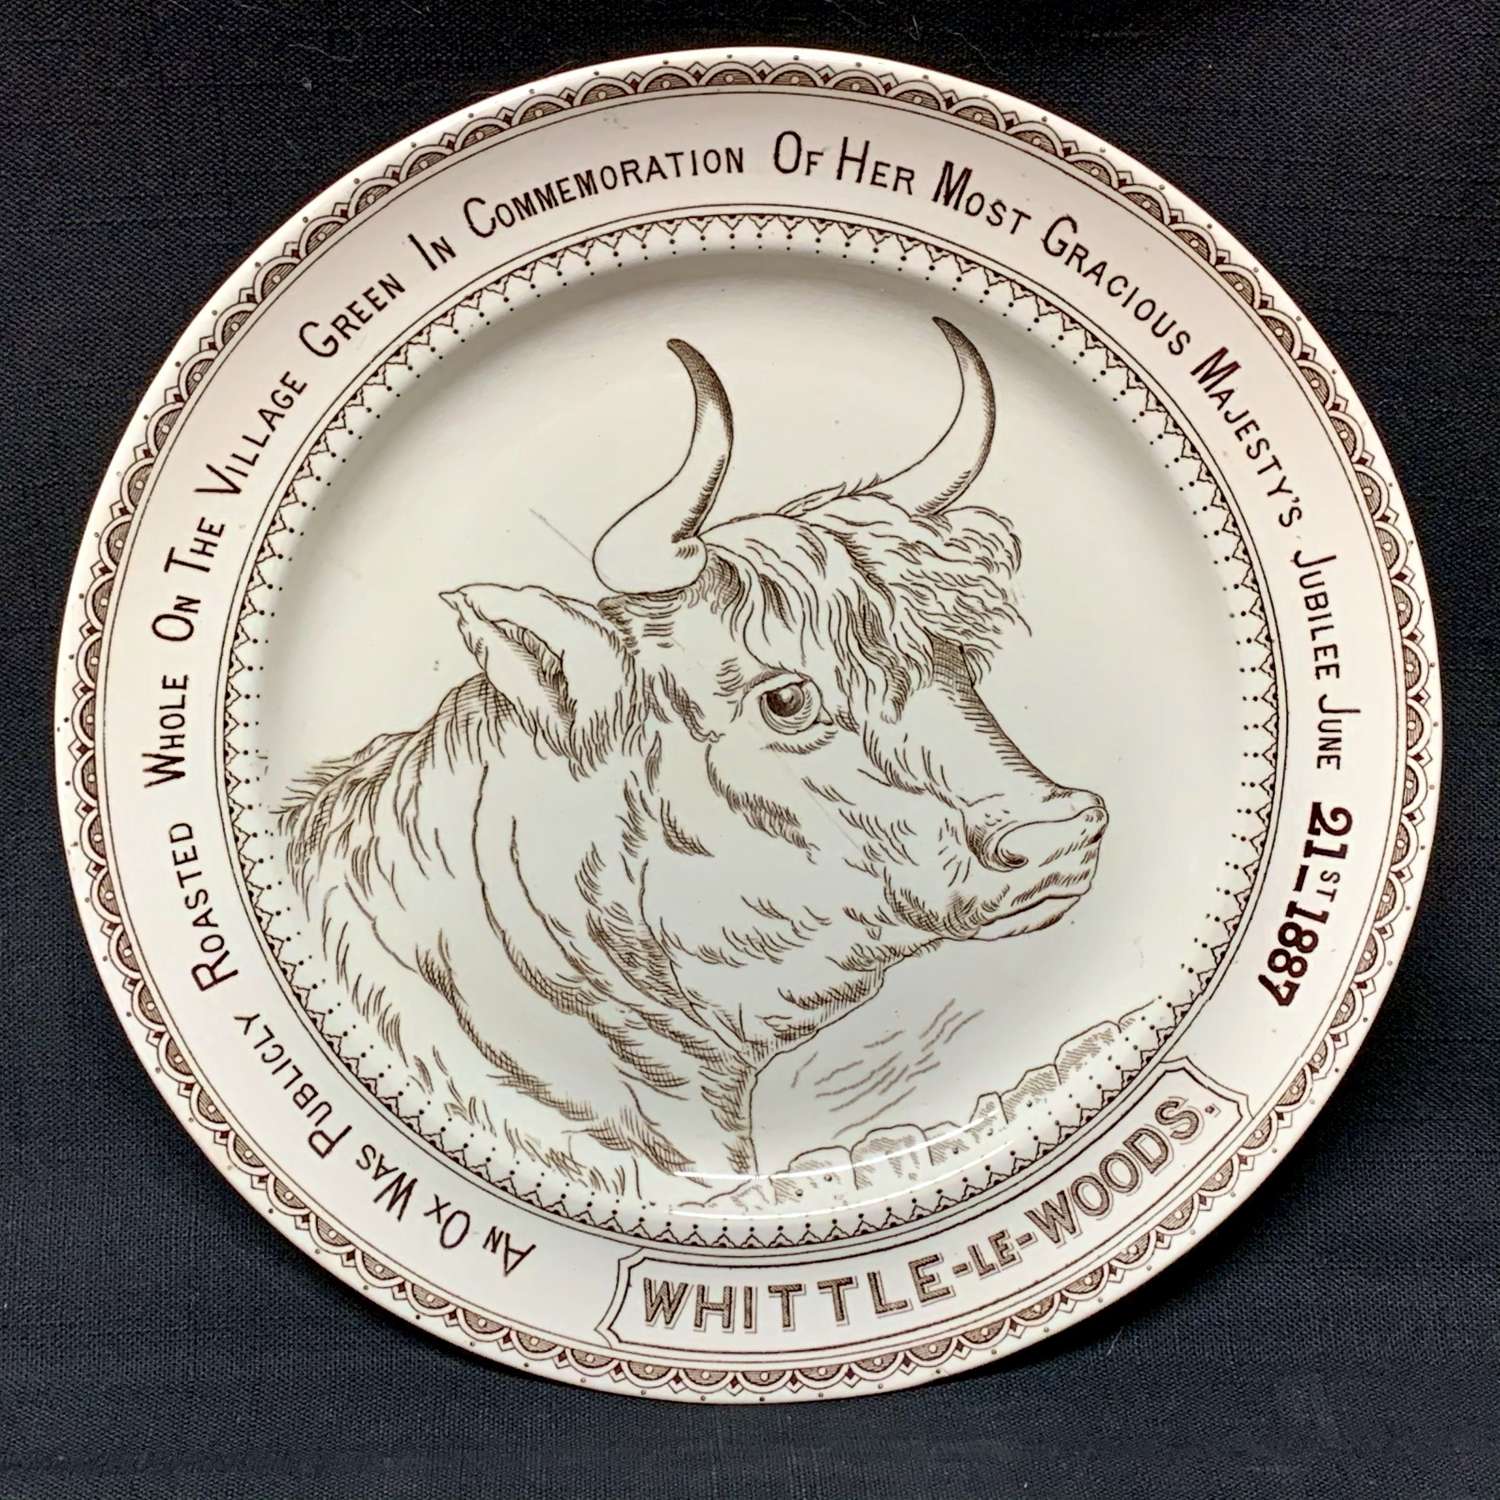 English Ironstone Adverting Plate Whittle-le-Woods ~ OX ROAST 1887